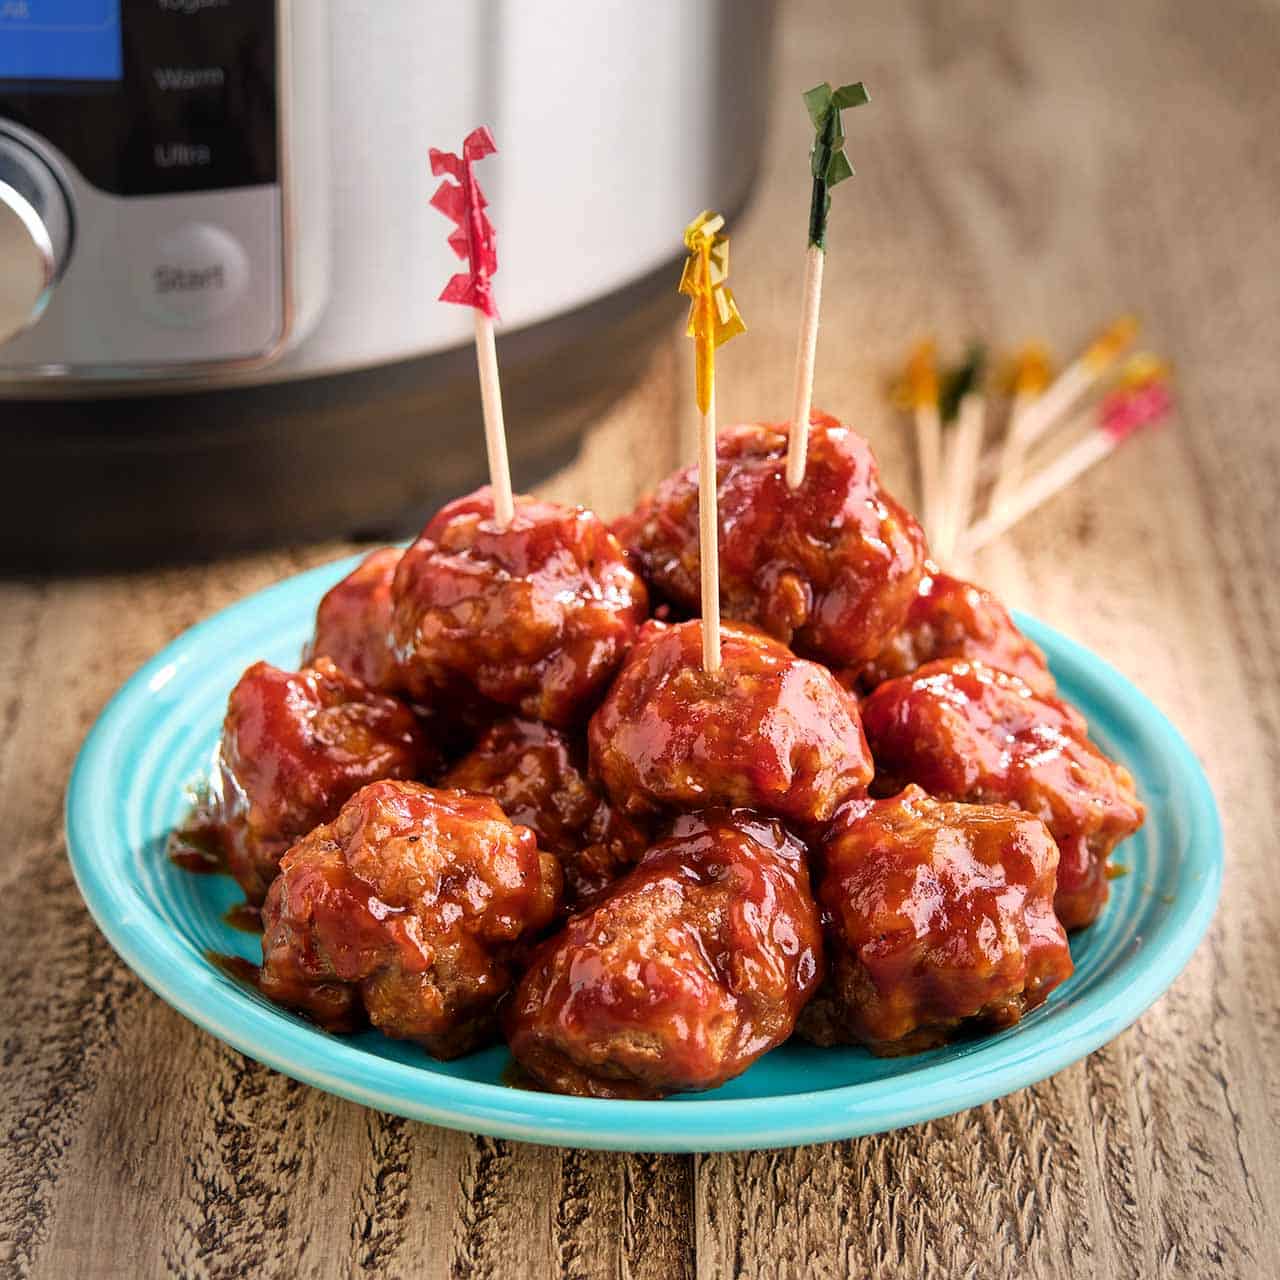 A plate of BBQ meatballs with frilly toothpicks, and an Instant Pot and more toothpicks in the background